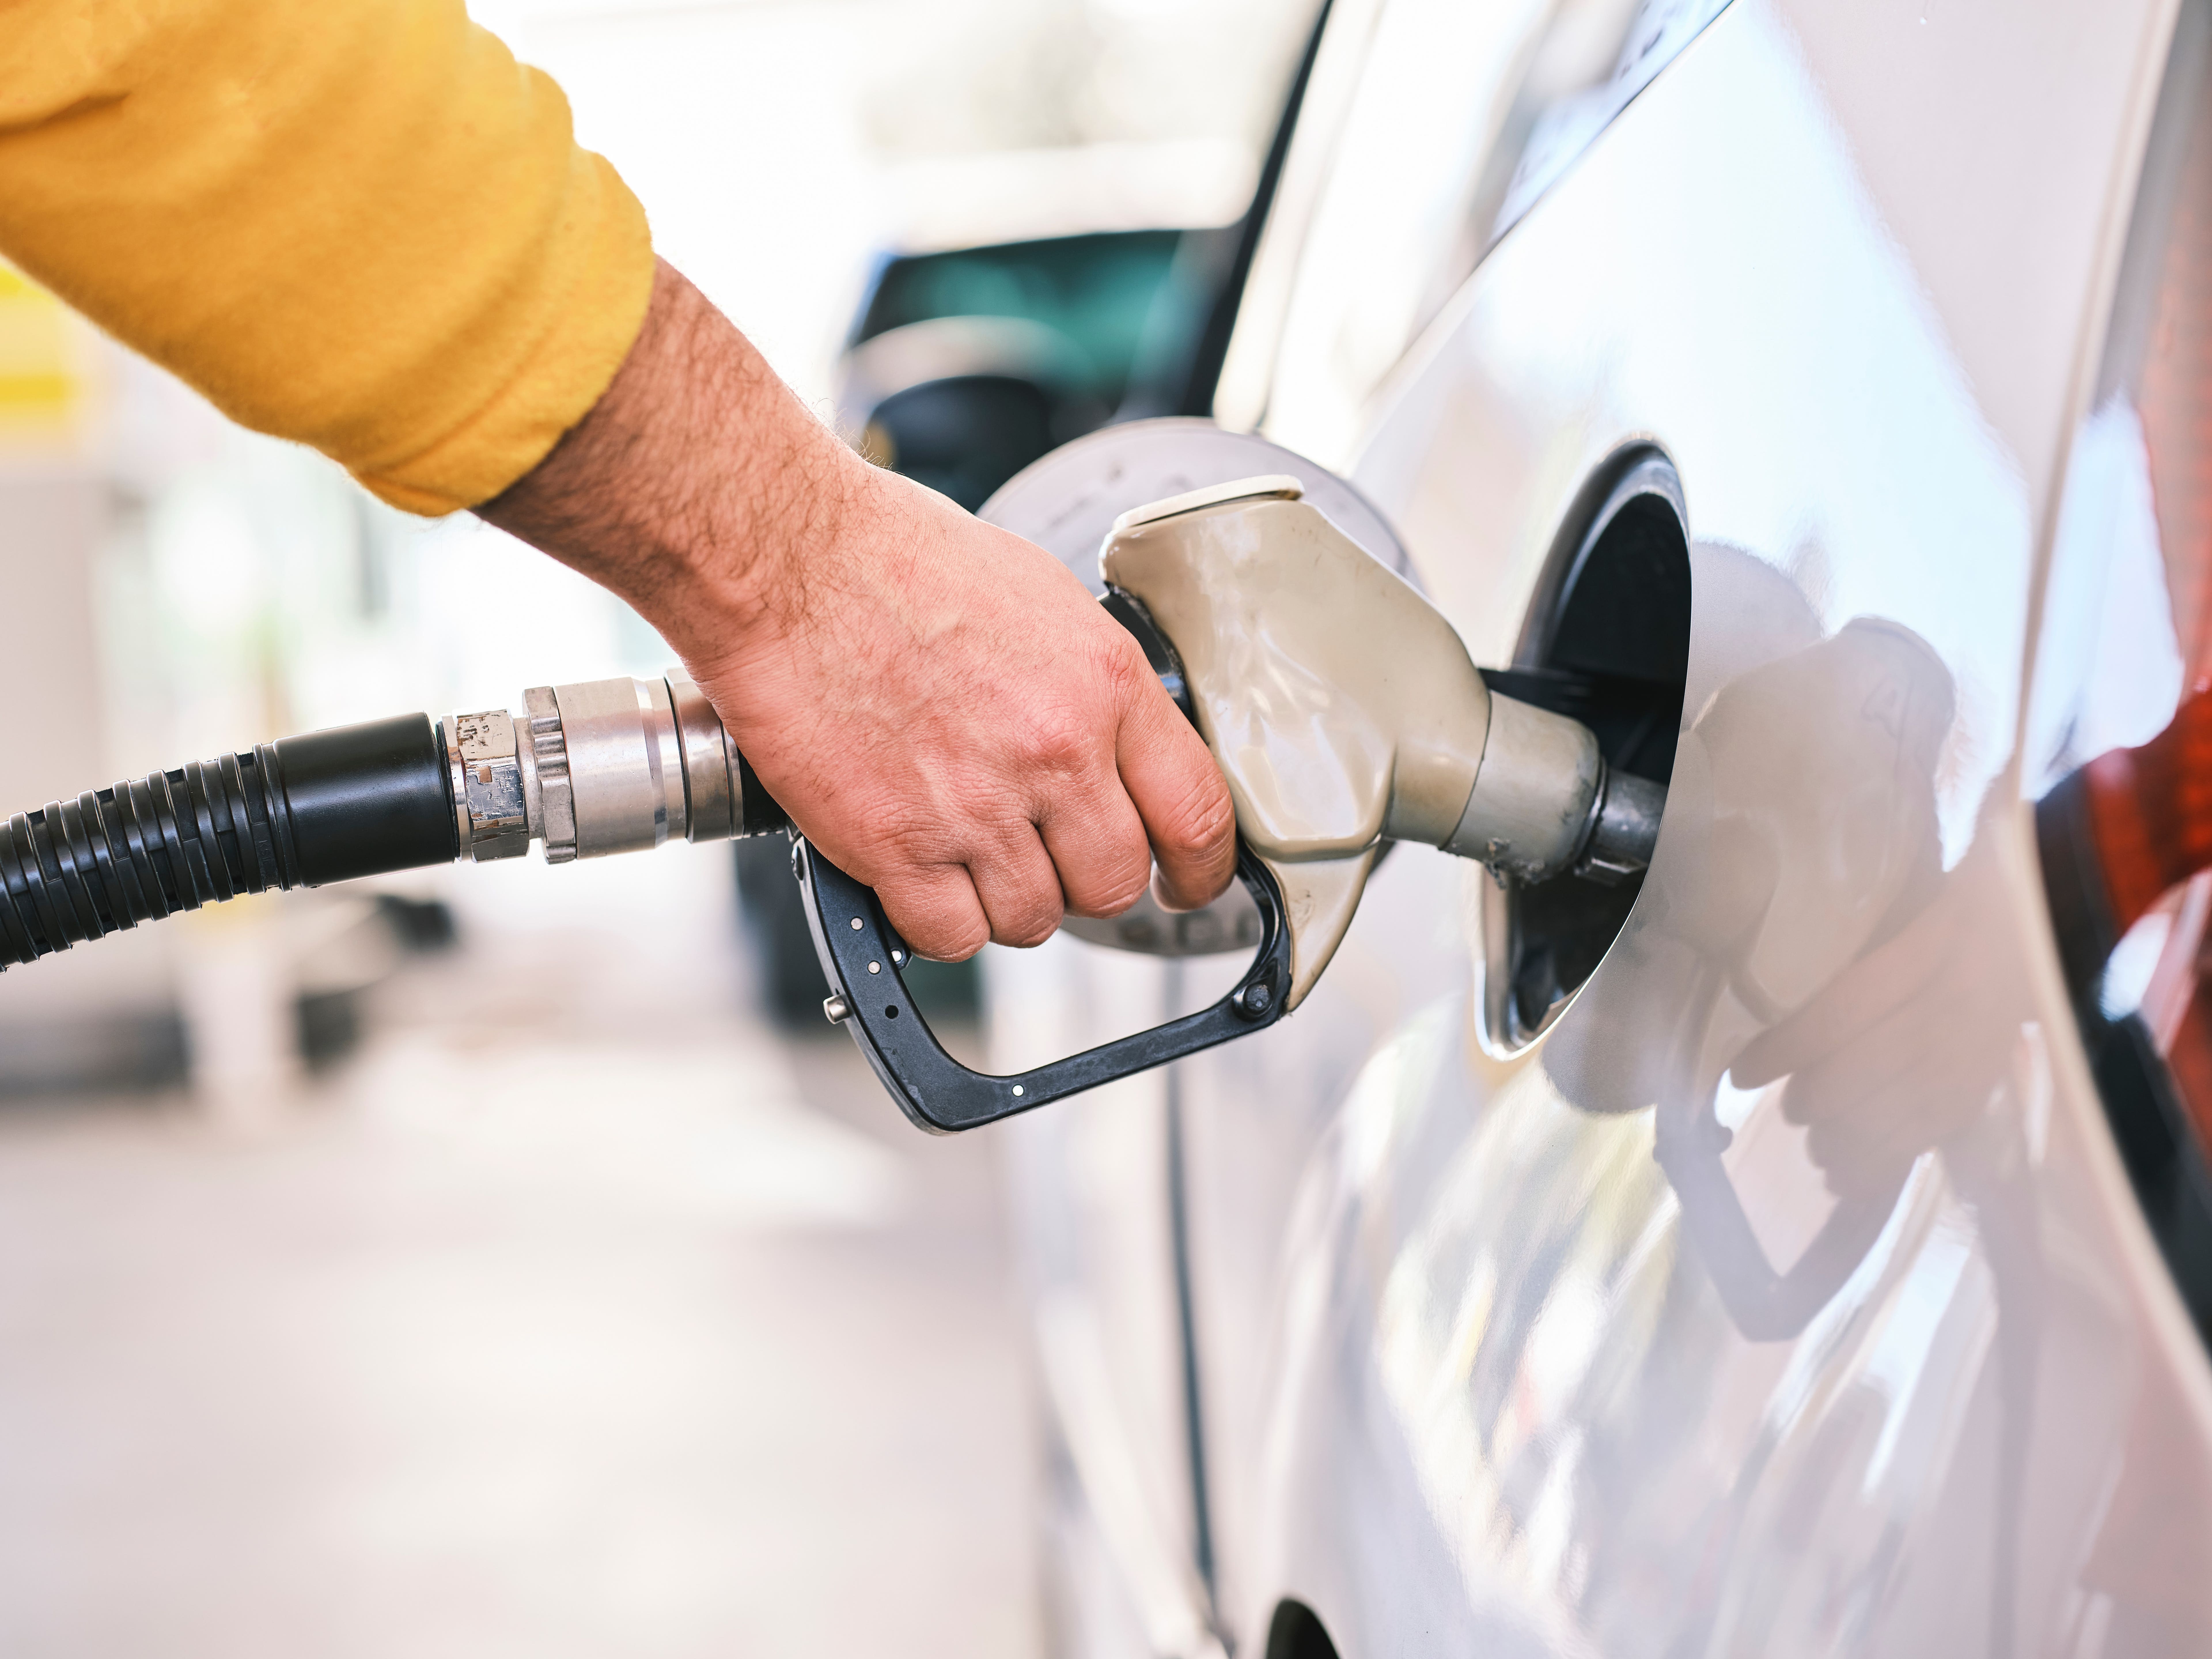 What Do Gasoline Prices And Jobs Data Mean For Inflation Report Next Week?